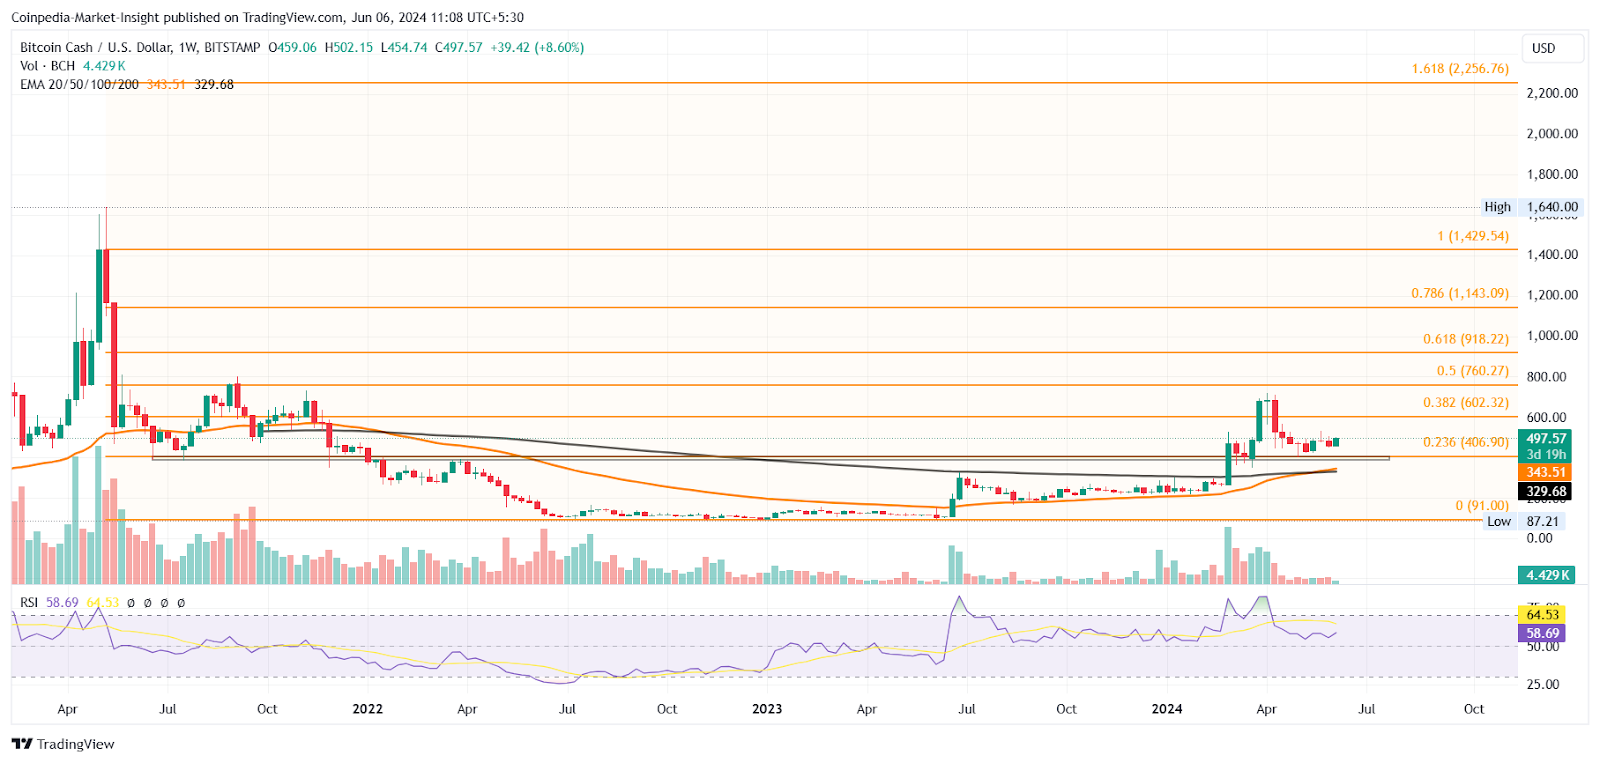 BCH Price Aims 55% Upside With $500 Breakout In June